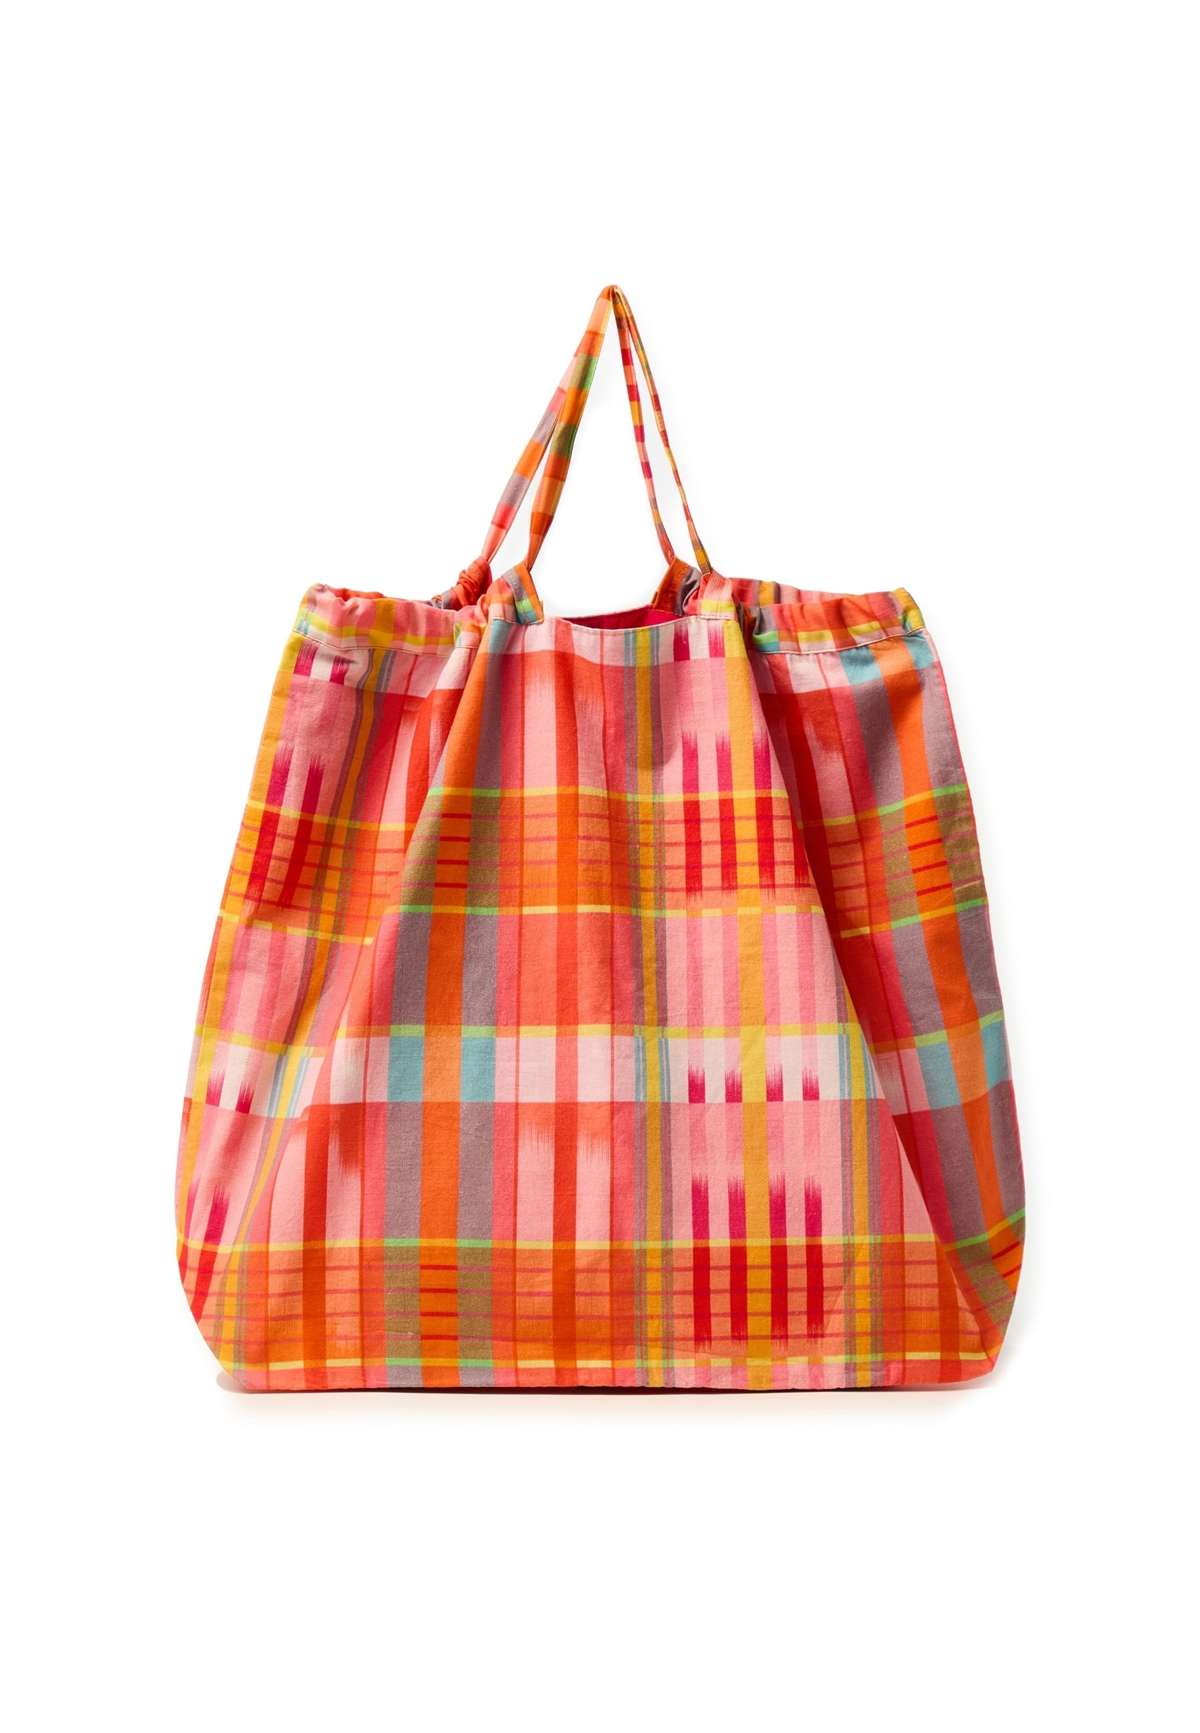 CHECK AND STRIPED SHOPPING - Shopping Bag CHECK AND STRIPED SHOPPING